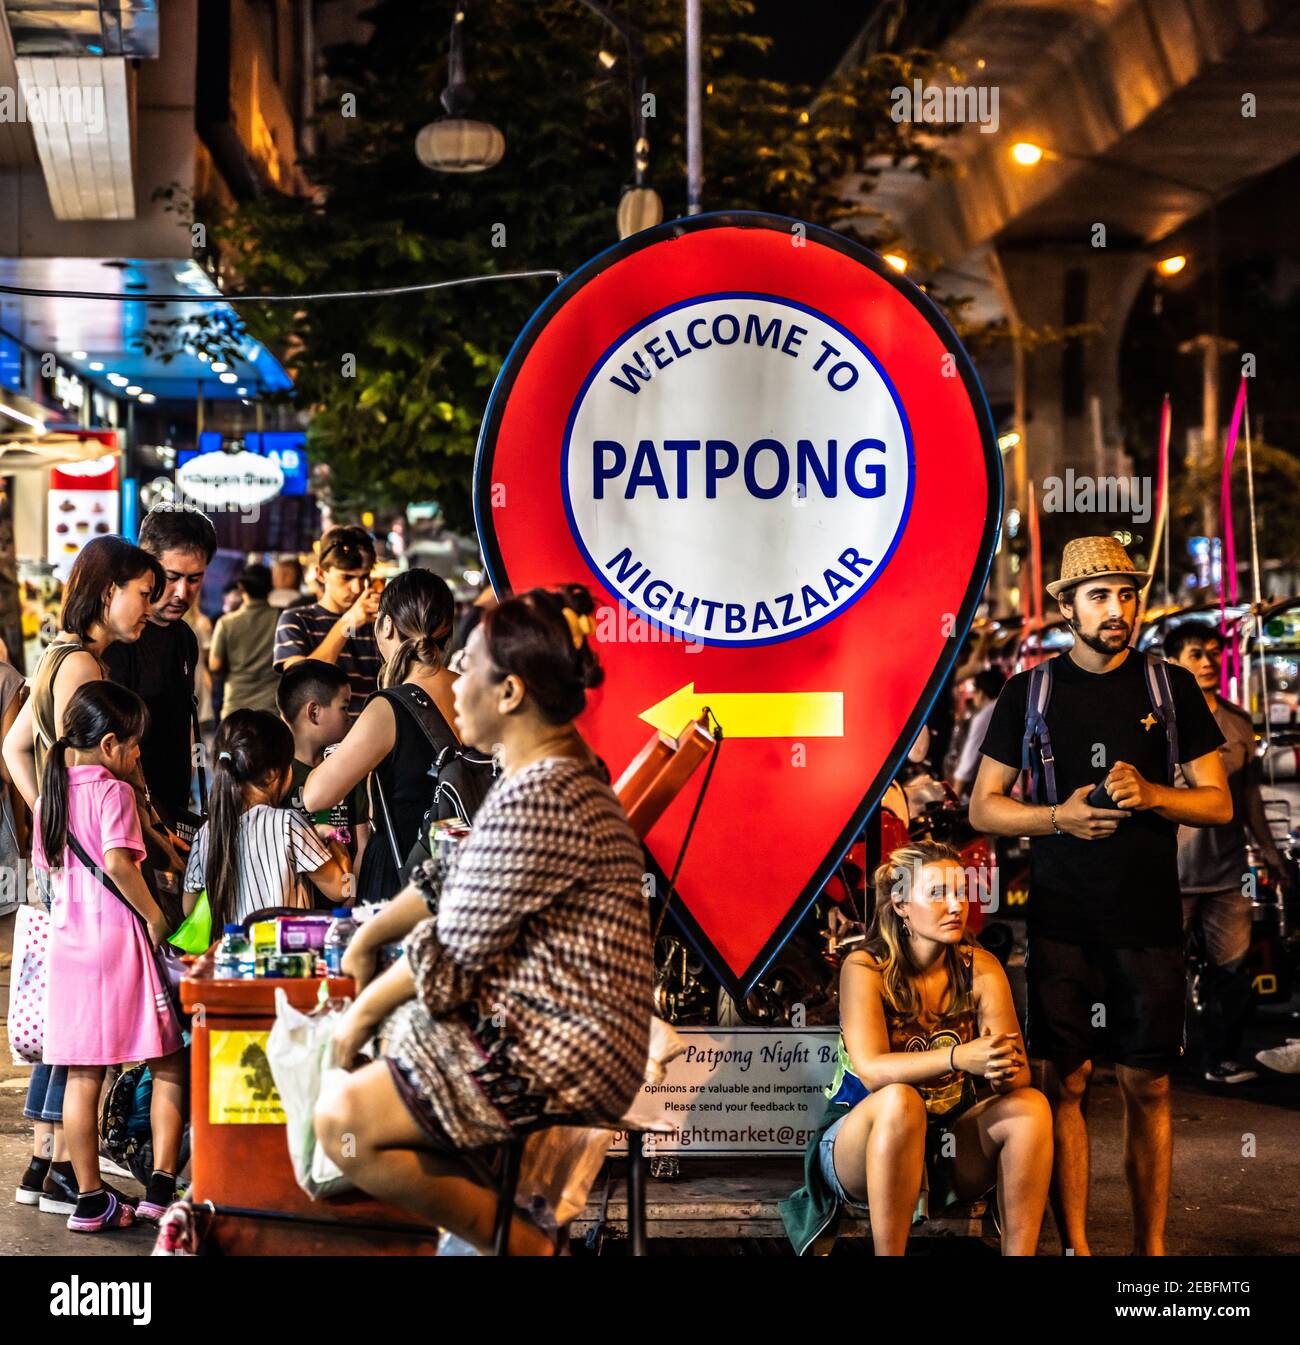 Tourists, shoppers and vendors at the Patong Nightbazaar in Bangok, Thailand. Stock Photo